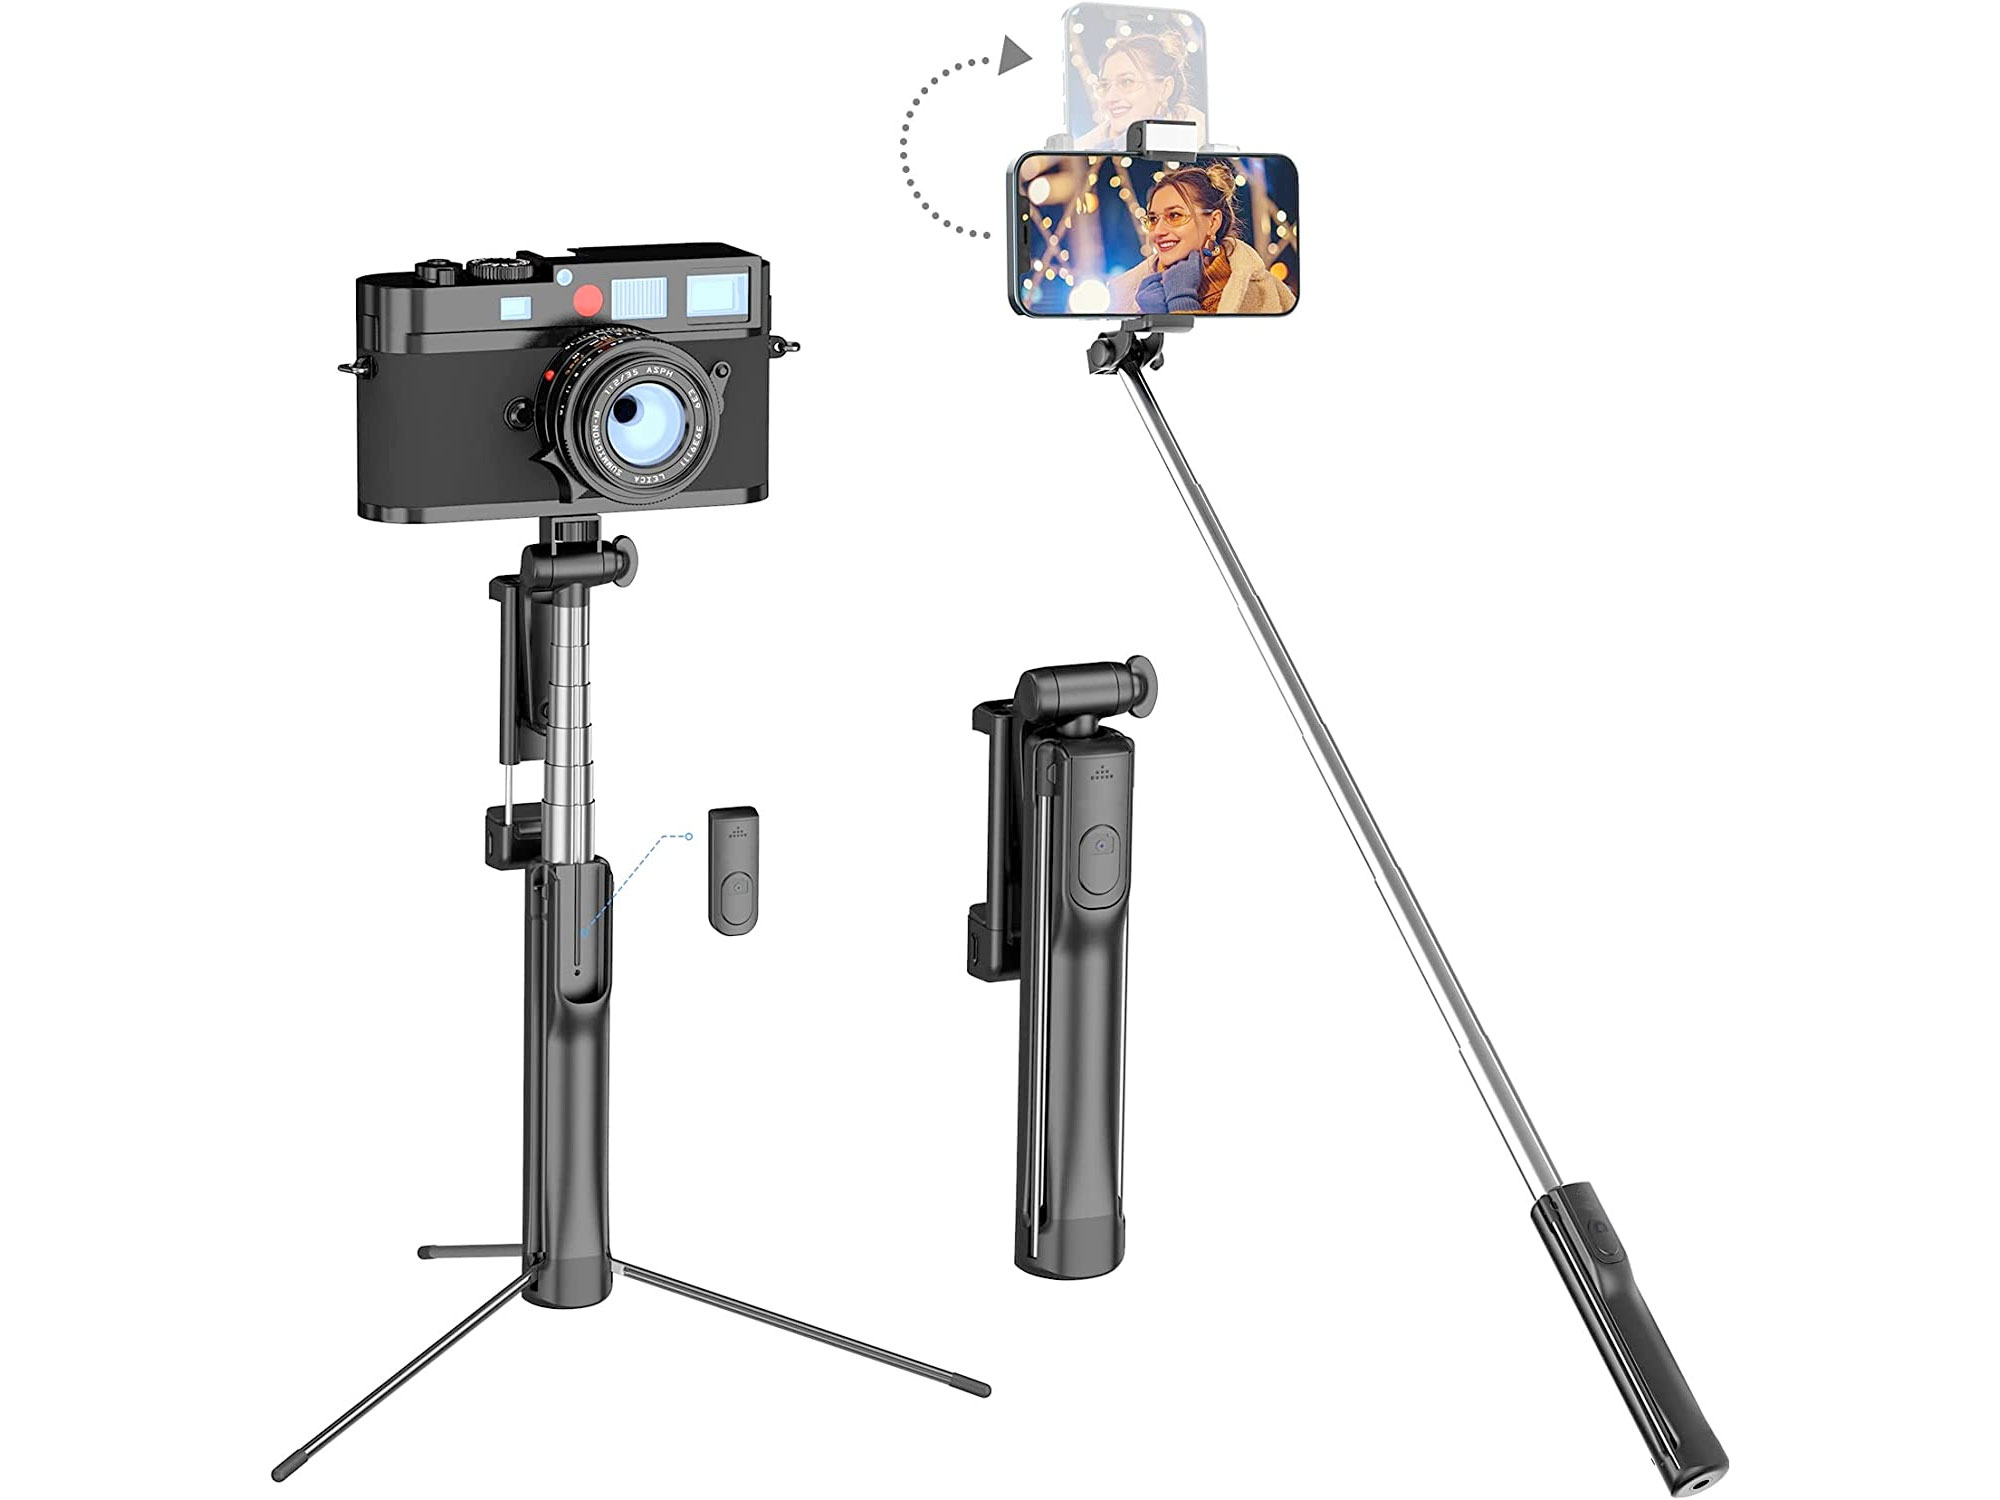 Amazon：Selfie Stick Tripod with Fill-in Light and Remote只賣$10.99